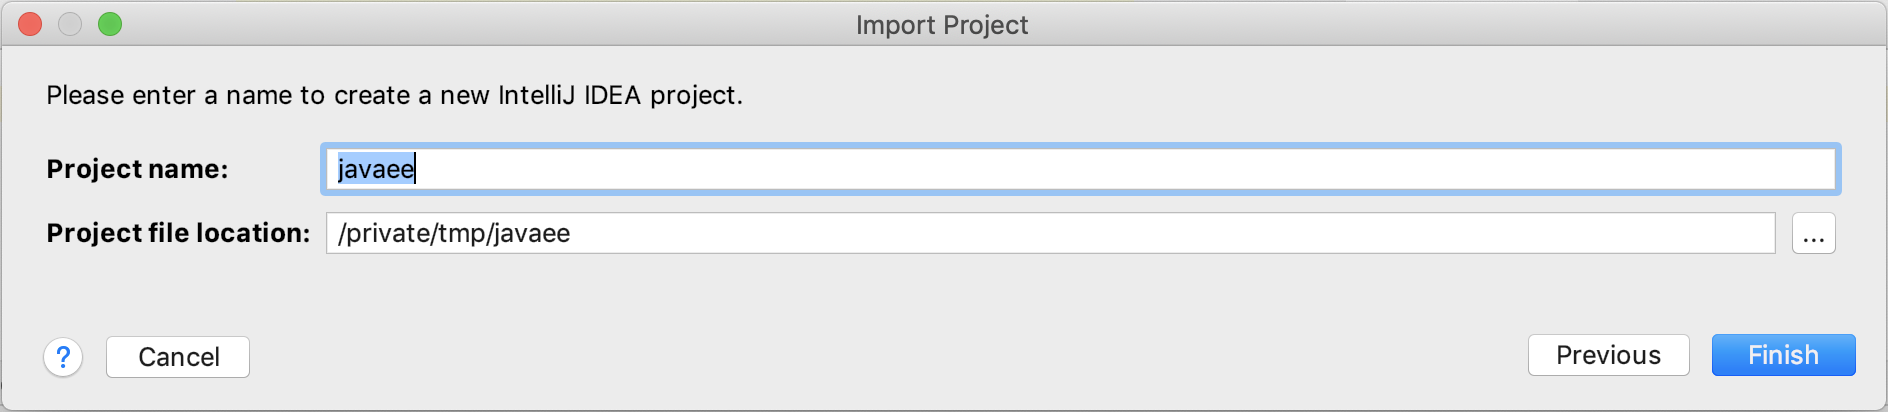 Import Project - step 5